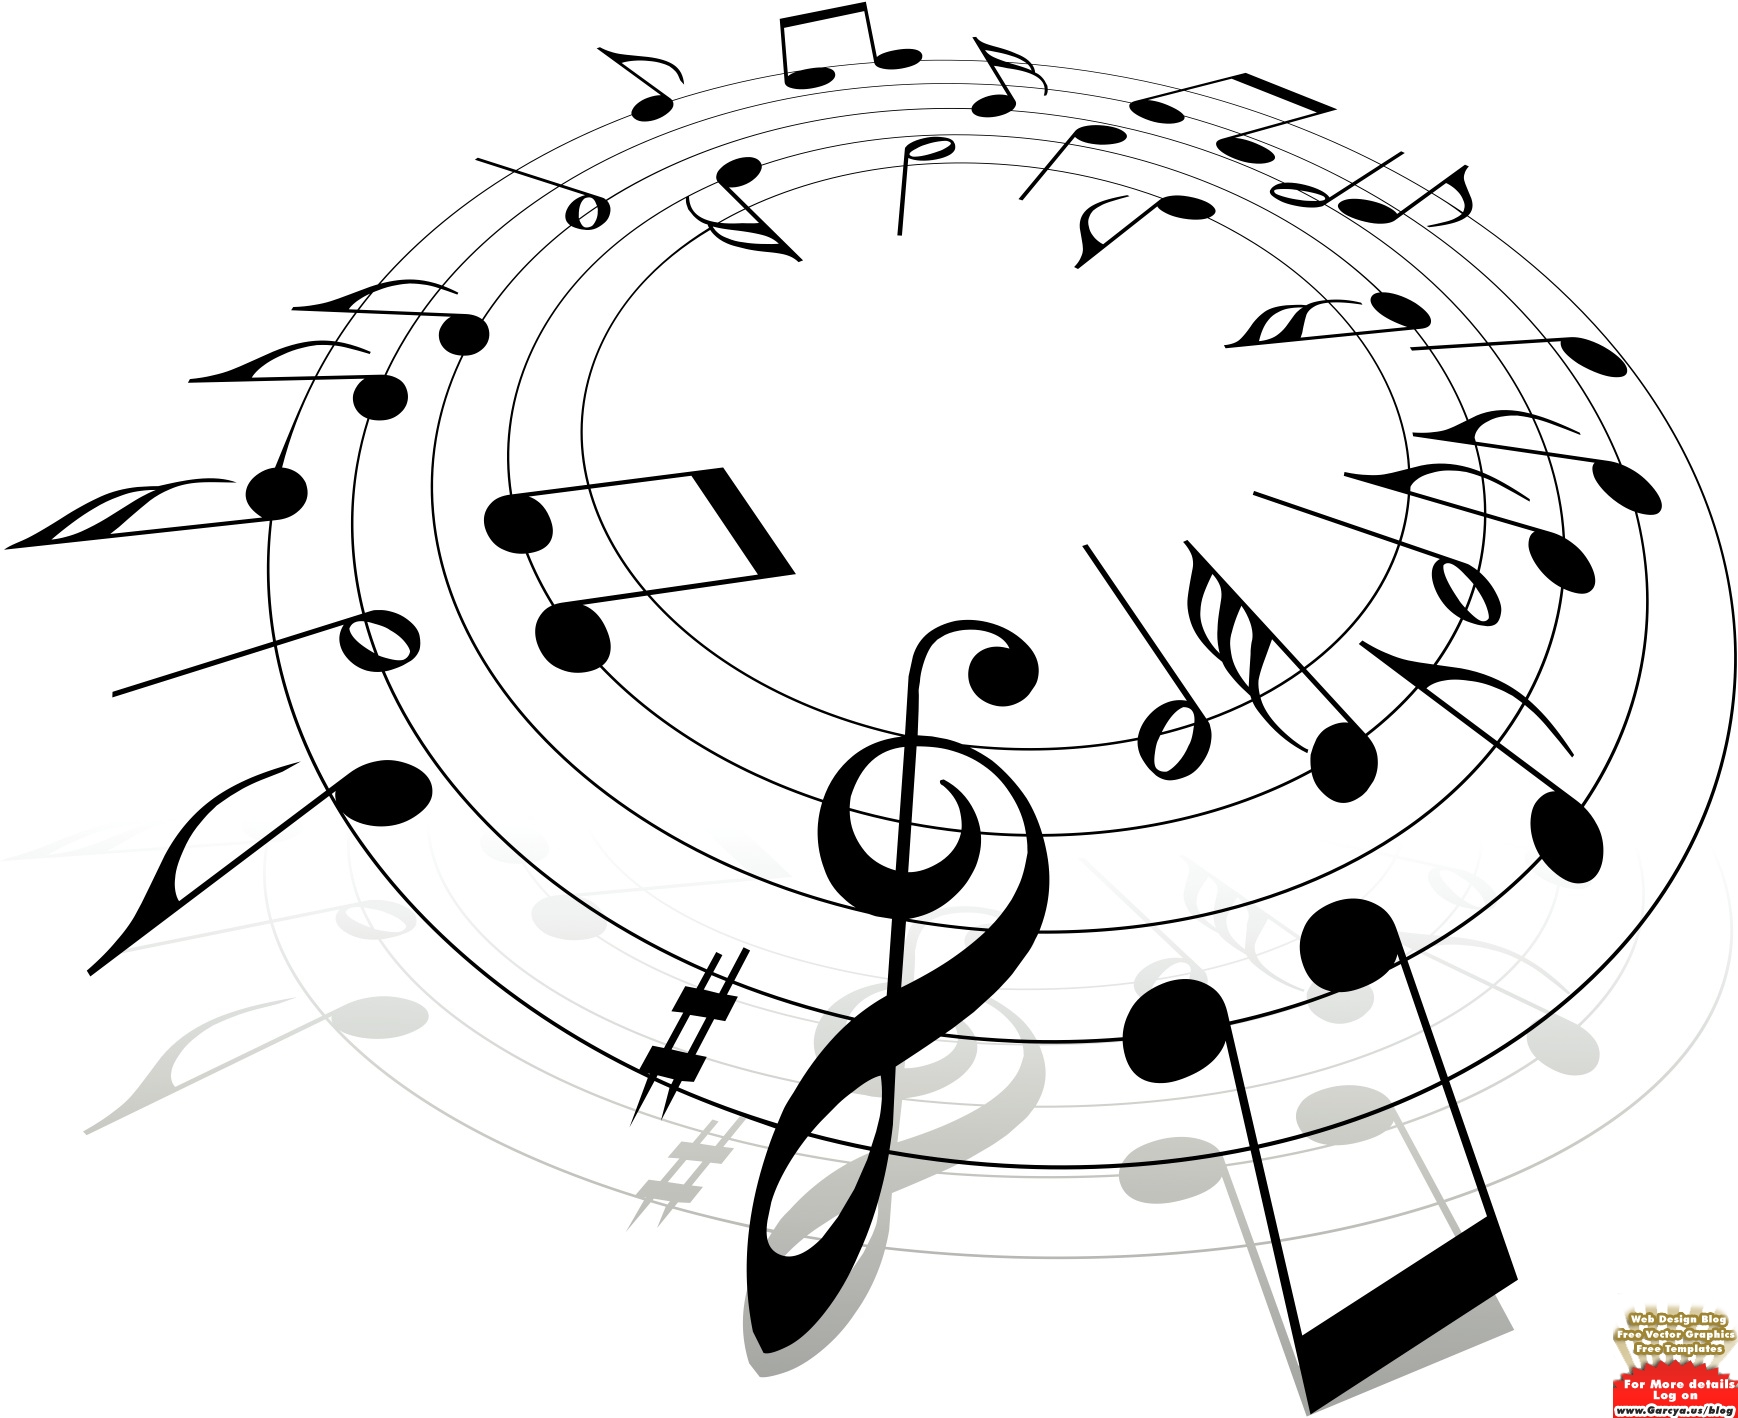 Musical clipart music notes free clipart images 2 image